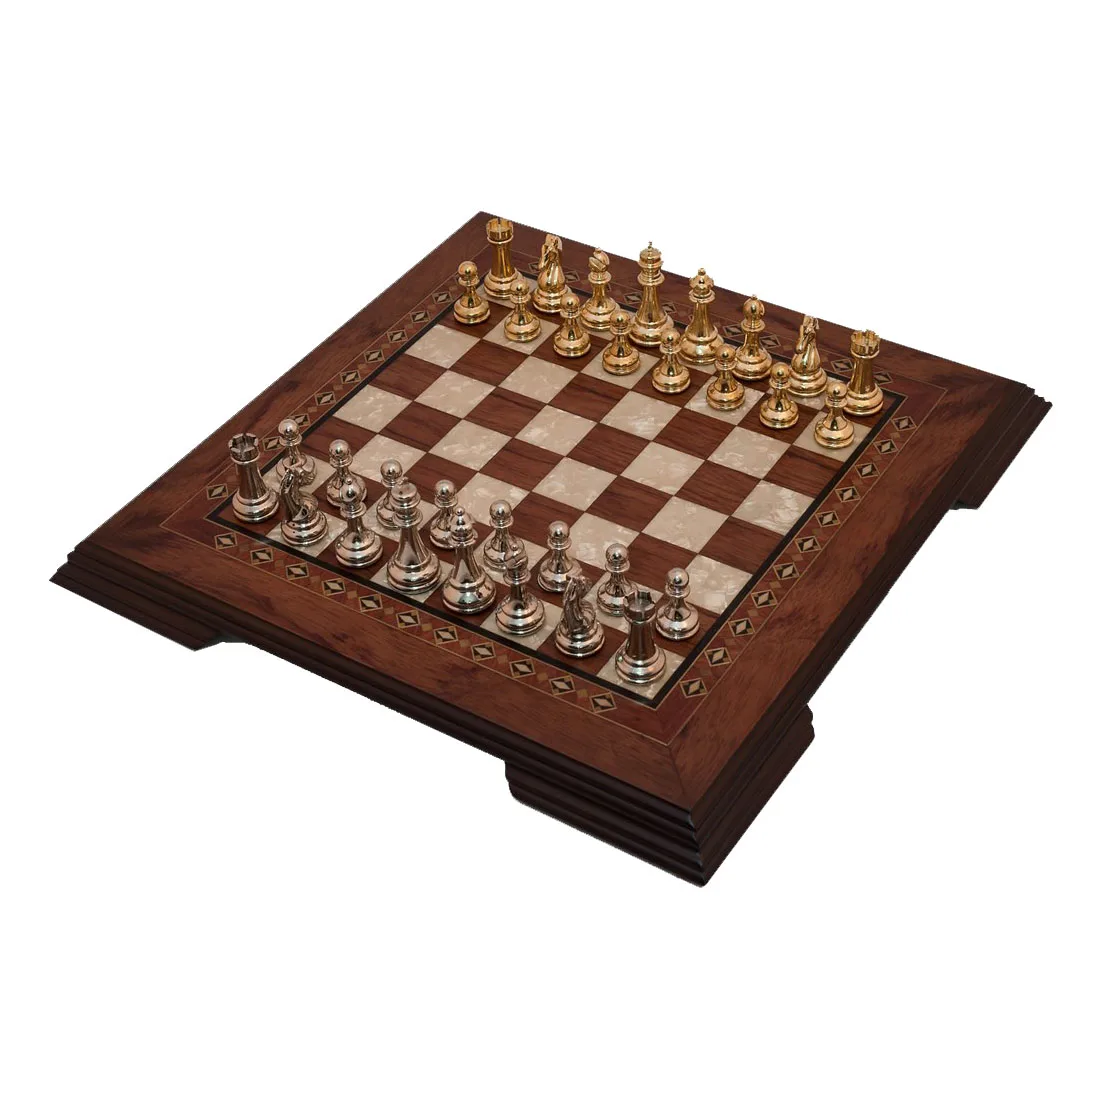 Solid Walnut Wood Chess Game Set - With Metal Figure - Footed Mosaic Engraved Chessboard Gift Items Шахматы solid walnut wood chess game set with metal figure footed mosaic engraved chessboard gift items шахматы